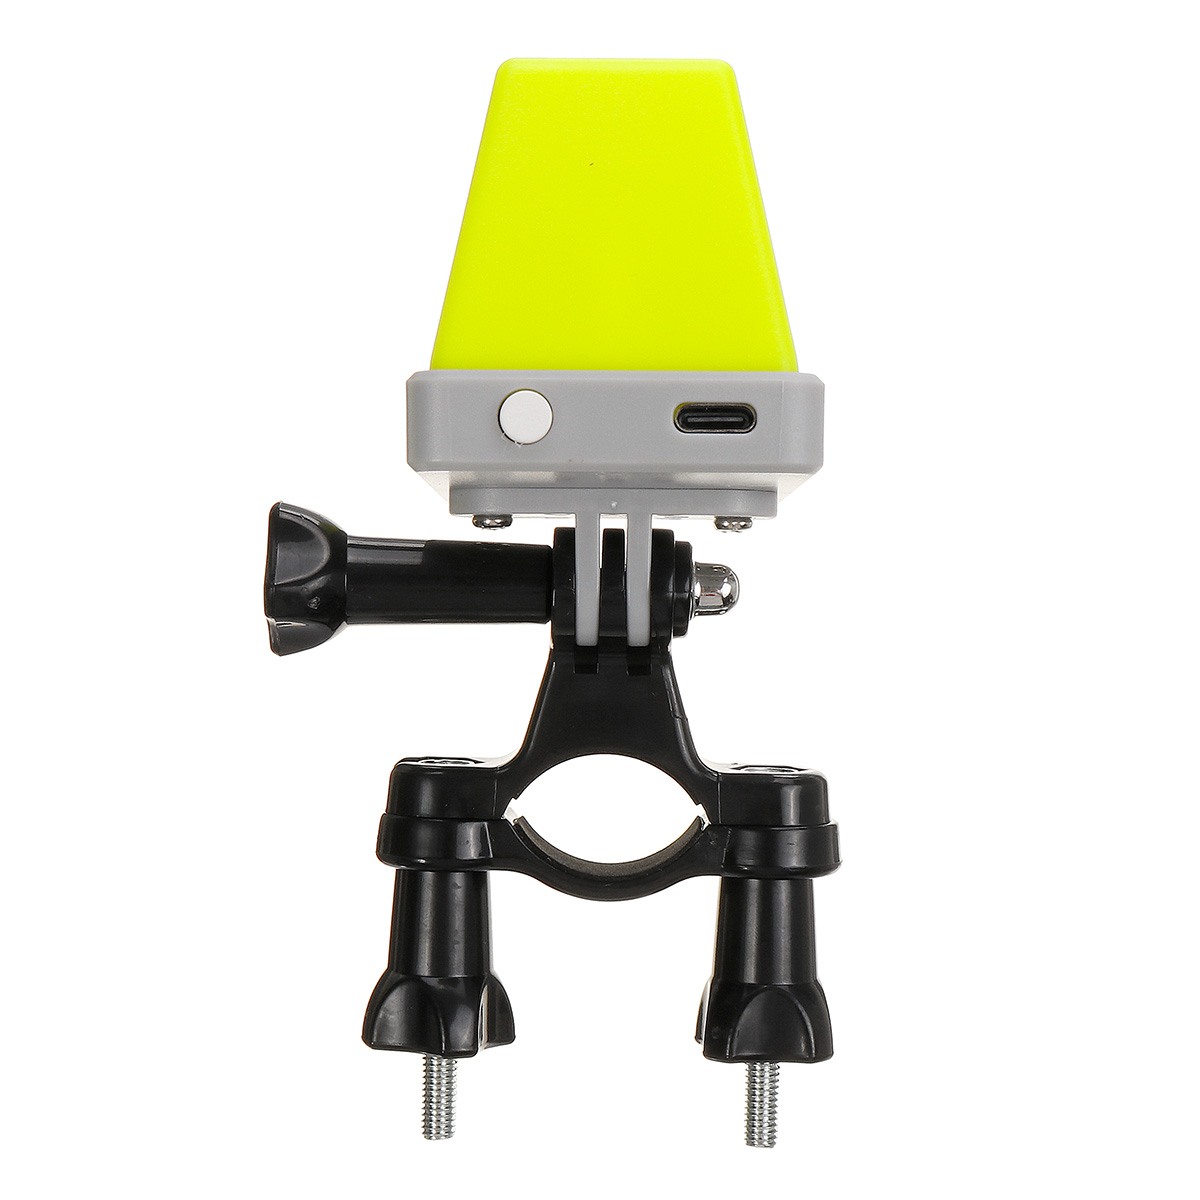 Helmet/Handlebar USB Rechargeable TAXI Sign Light Indicator Decoration for Motorcycle Bike Electirc Scooter - Auto GoShop